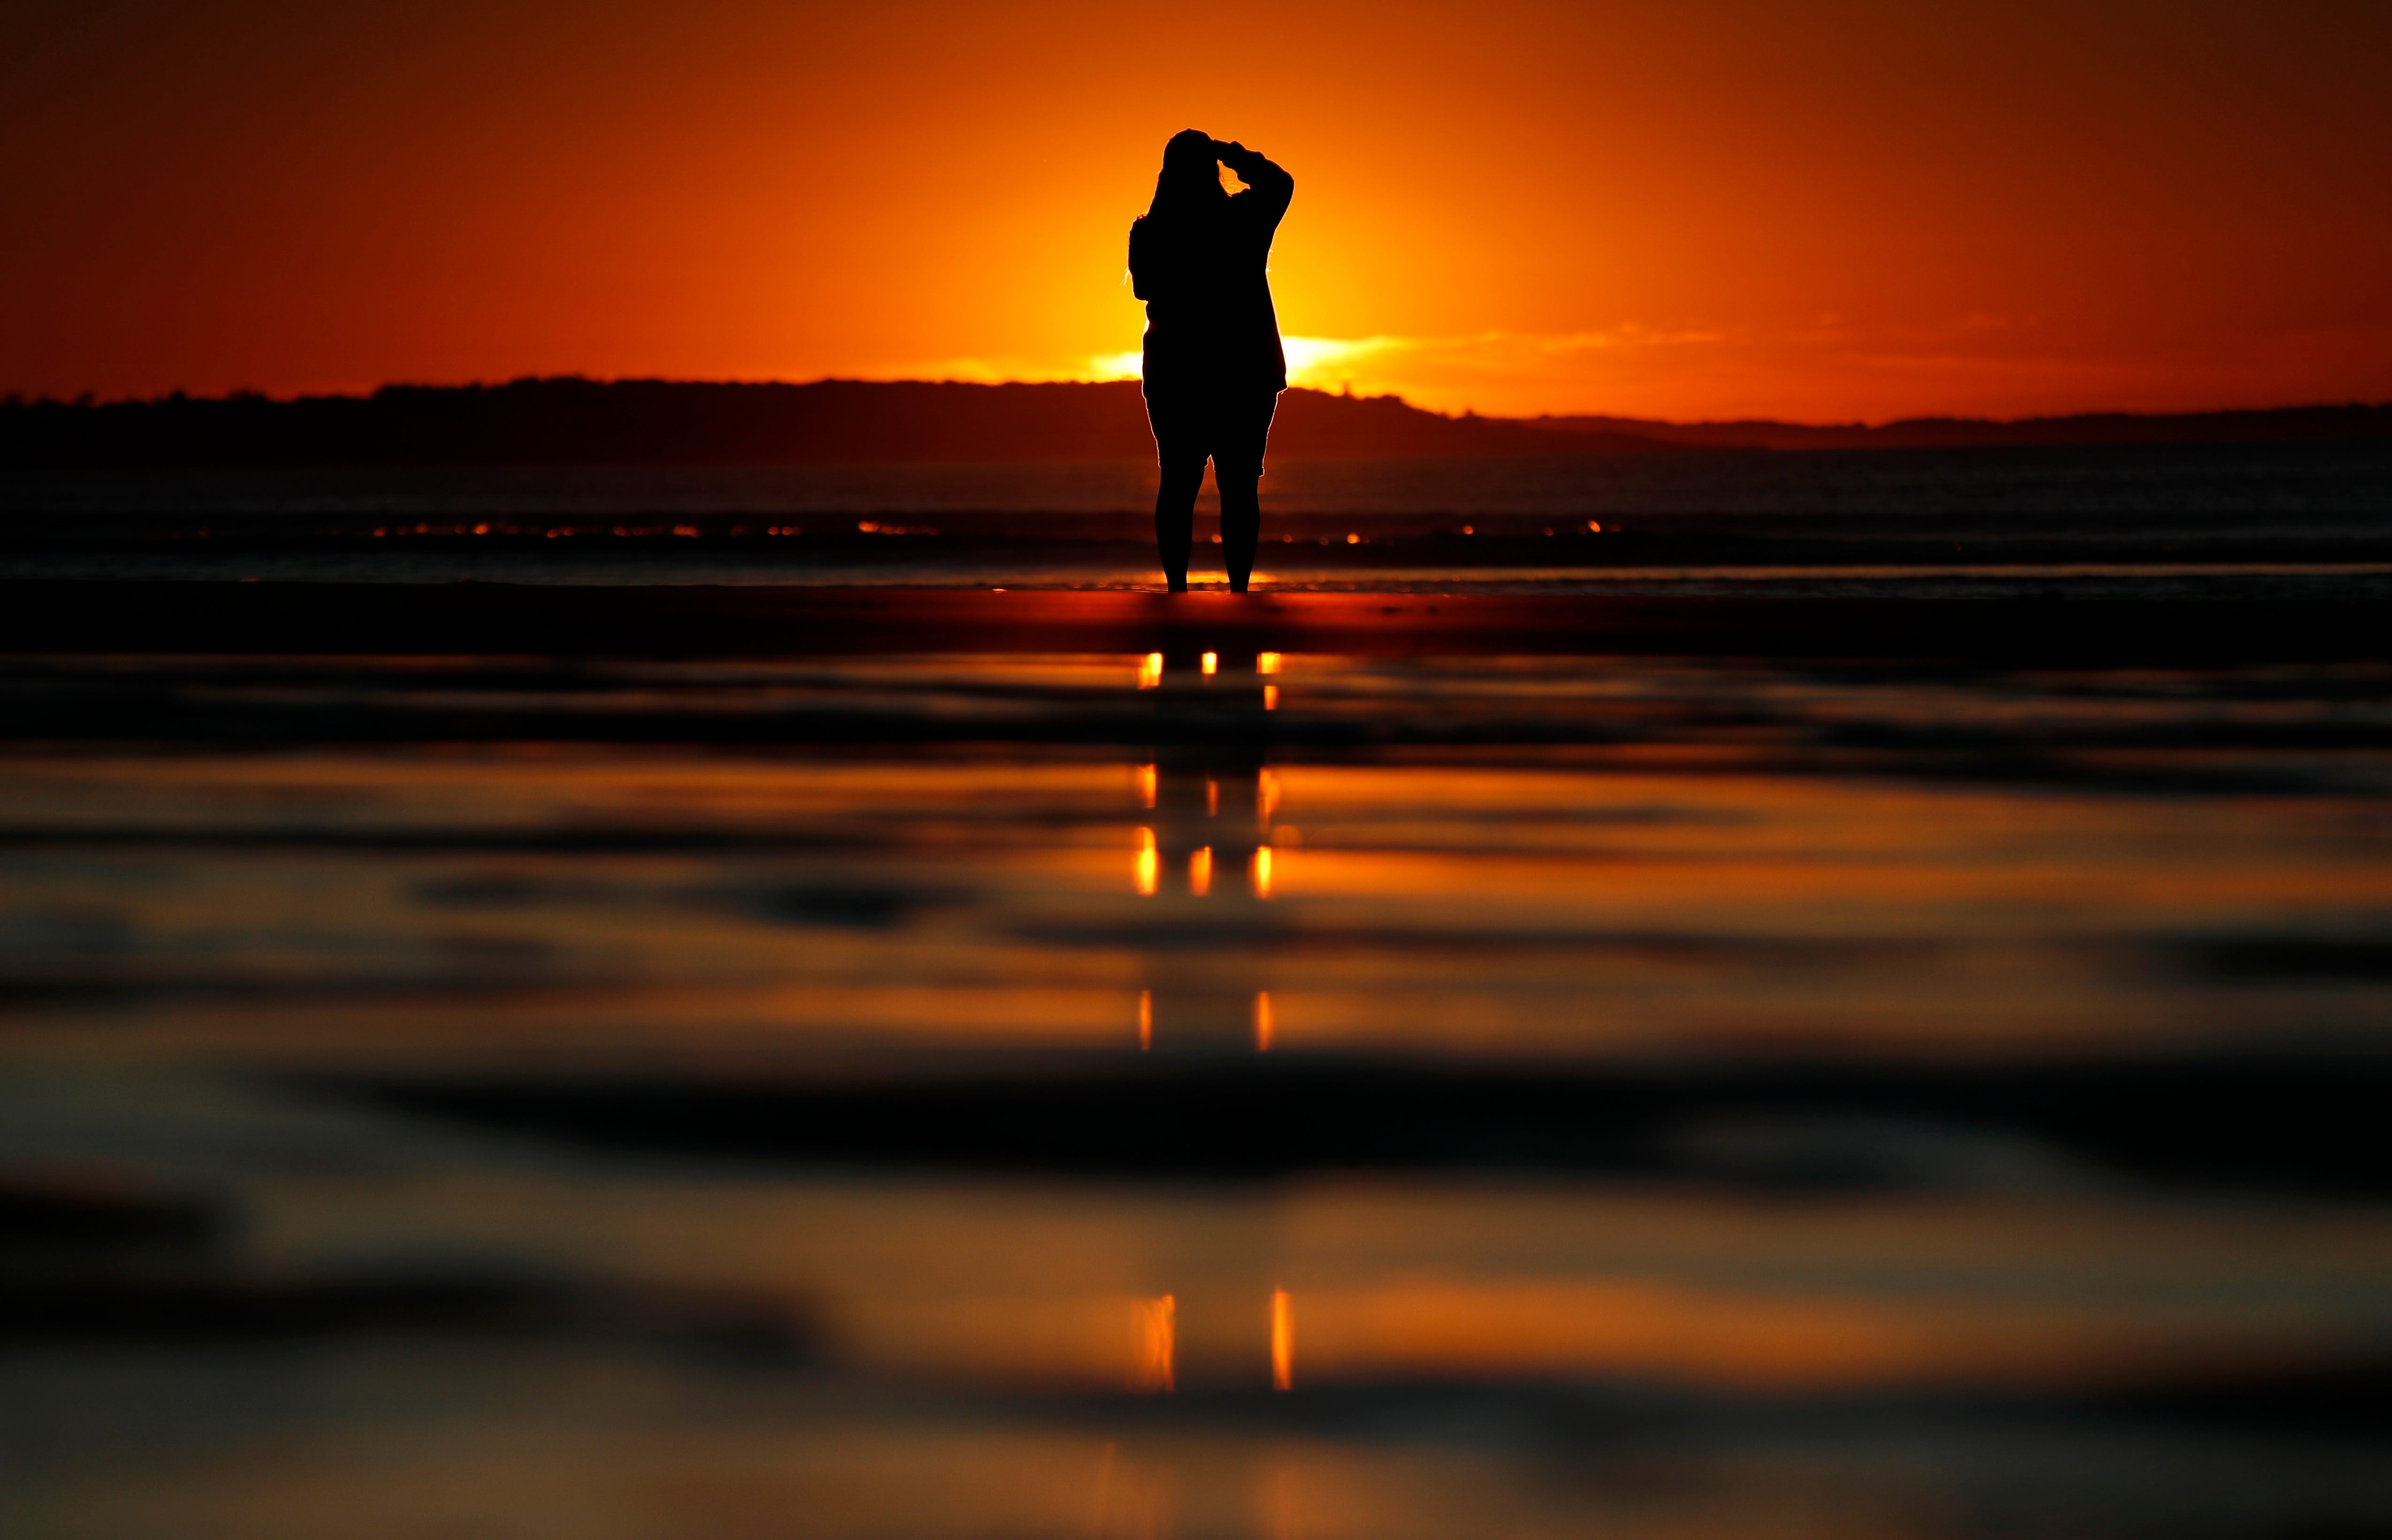 Consuello Jessop, of Providence, R.I., photographs the sunrise at Ocean Park in Old Orchard Beach, Maine.